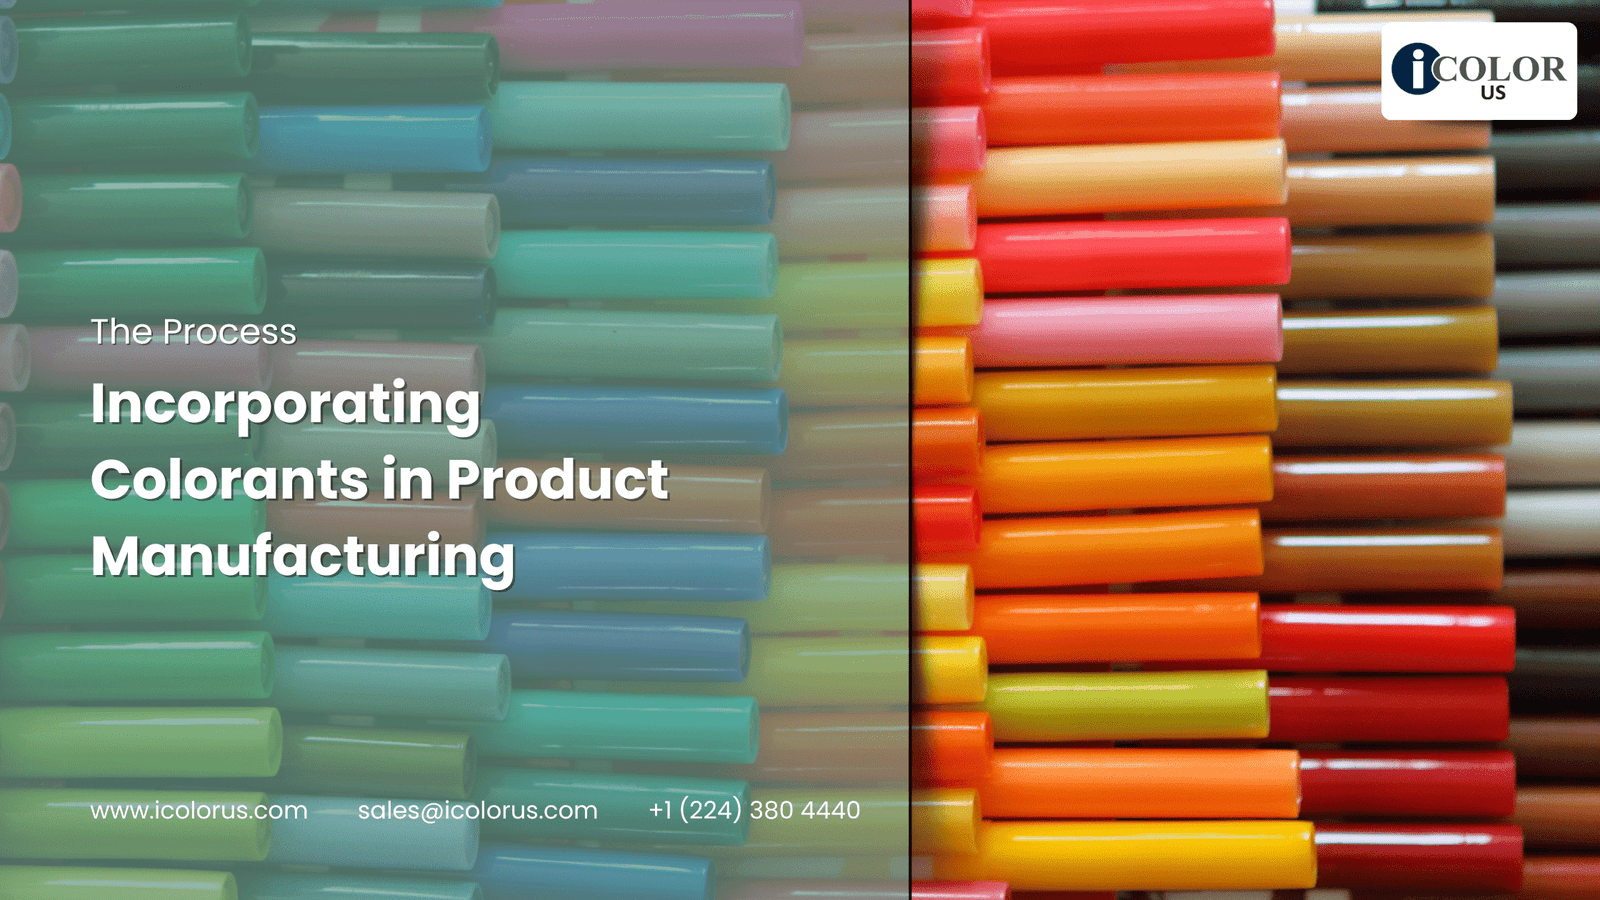 Incorporating Colorants in Product Manufacturing